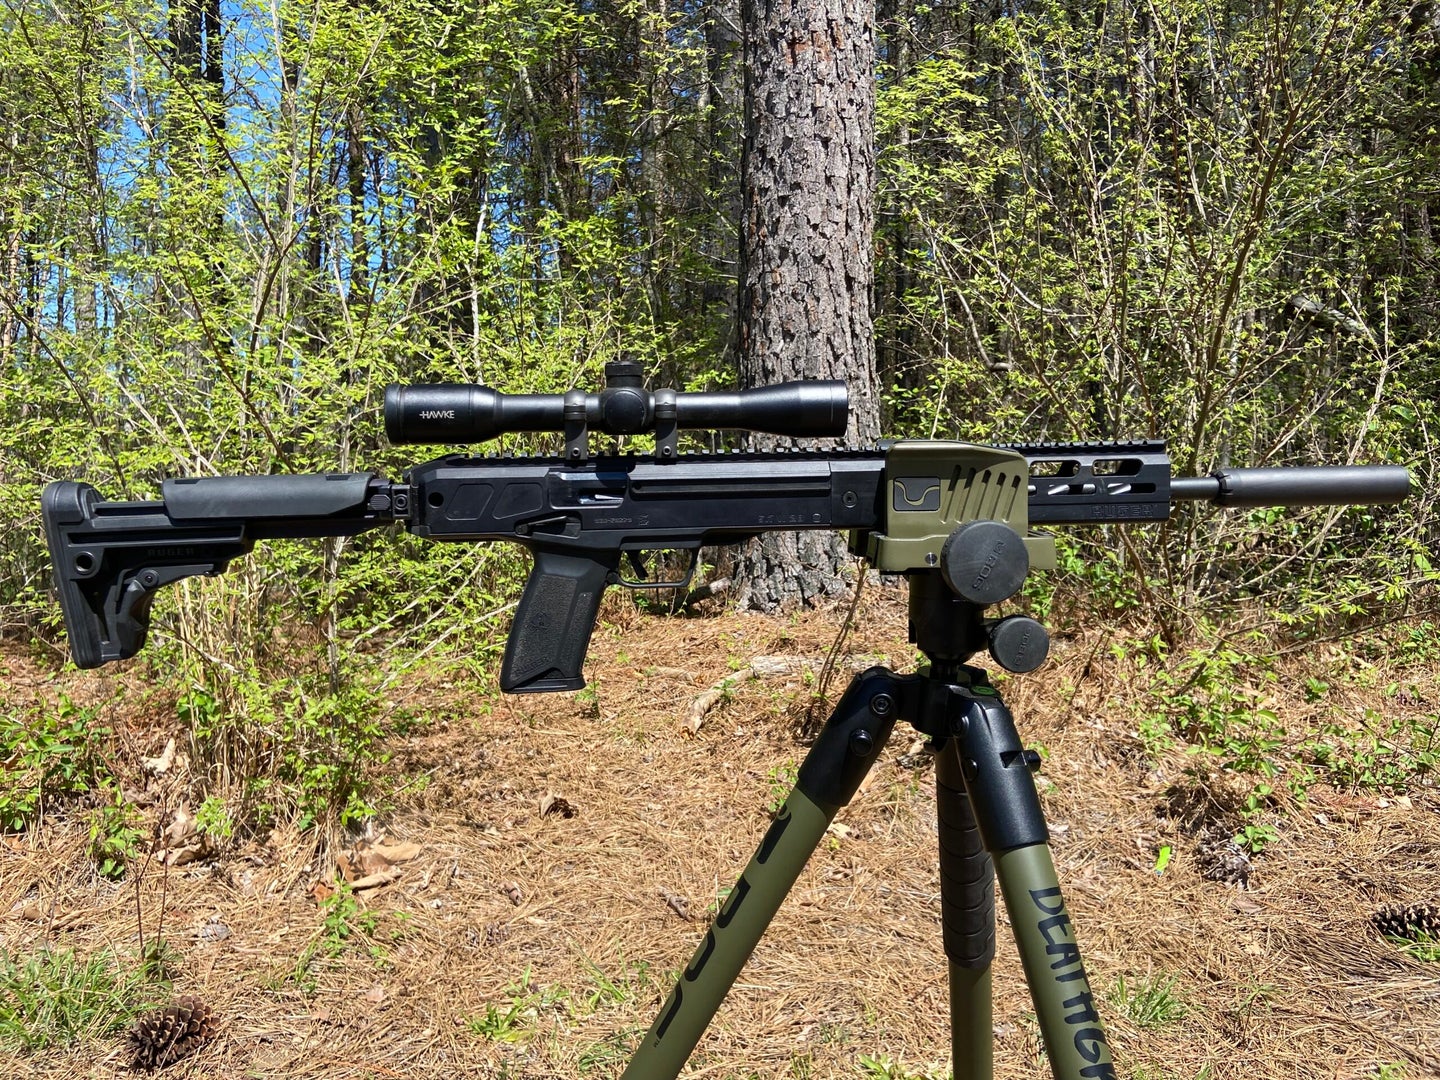 Ruger rifle on a tripod.